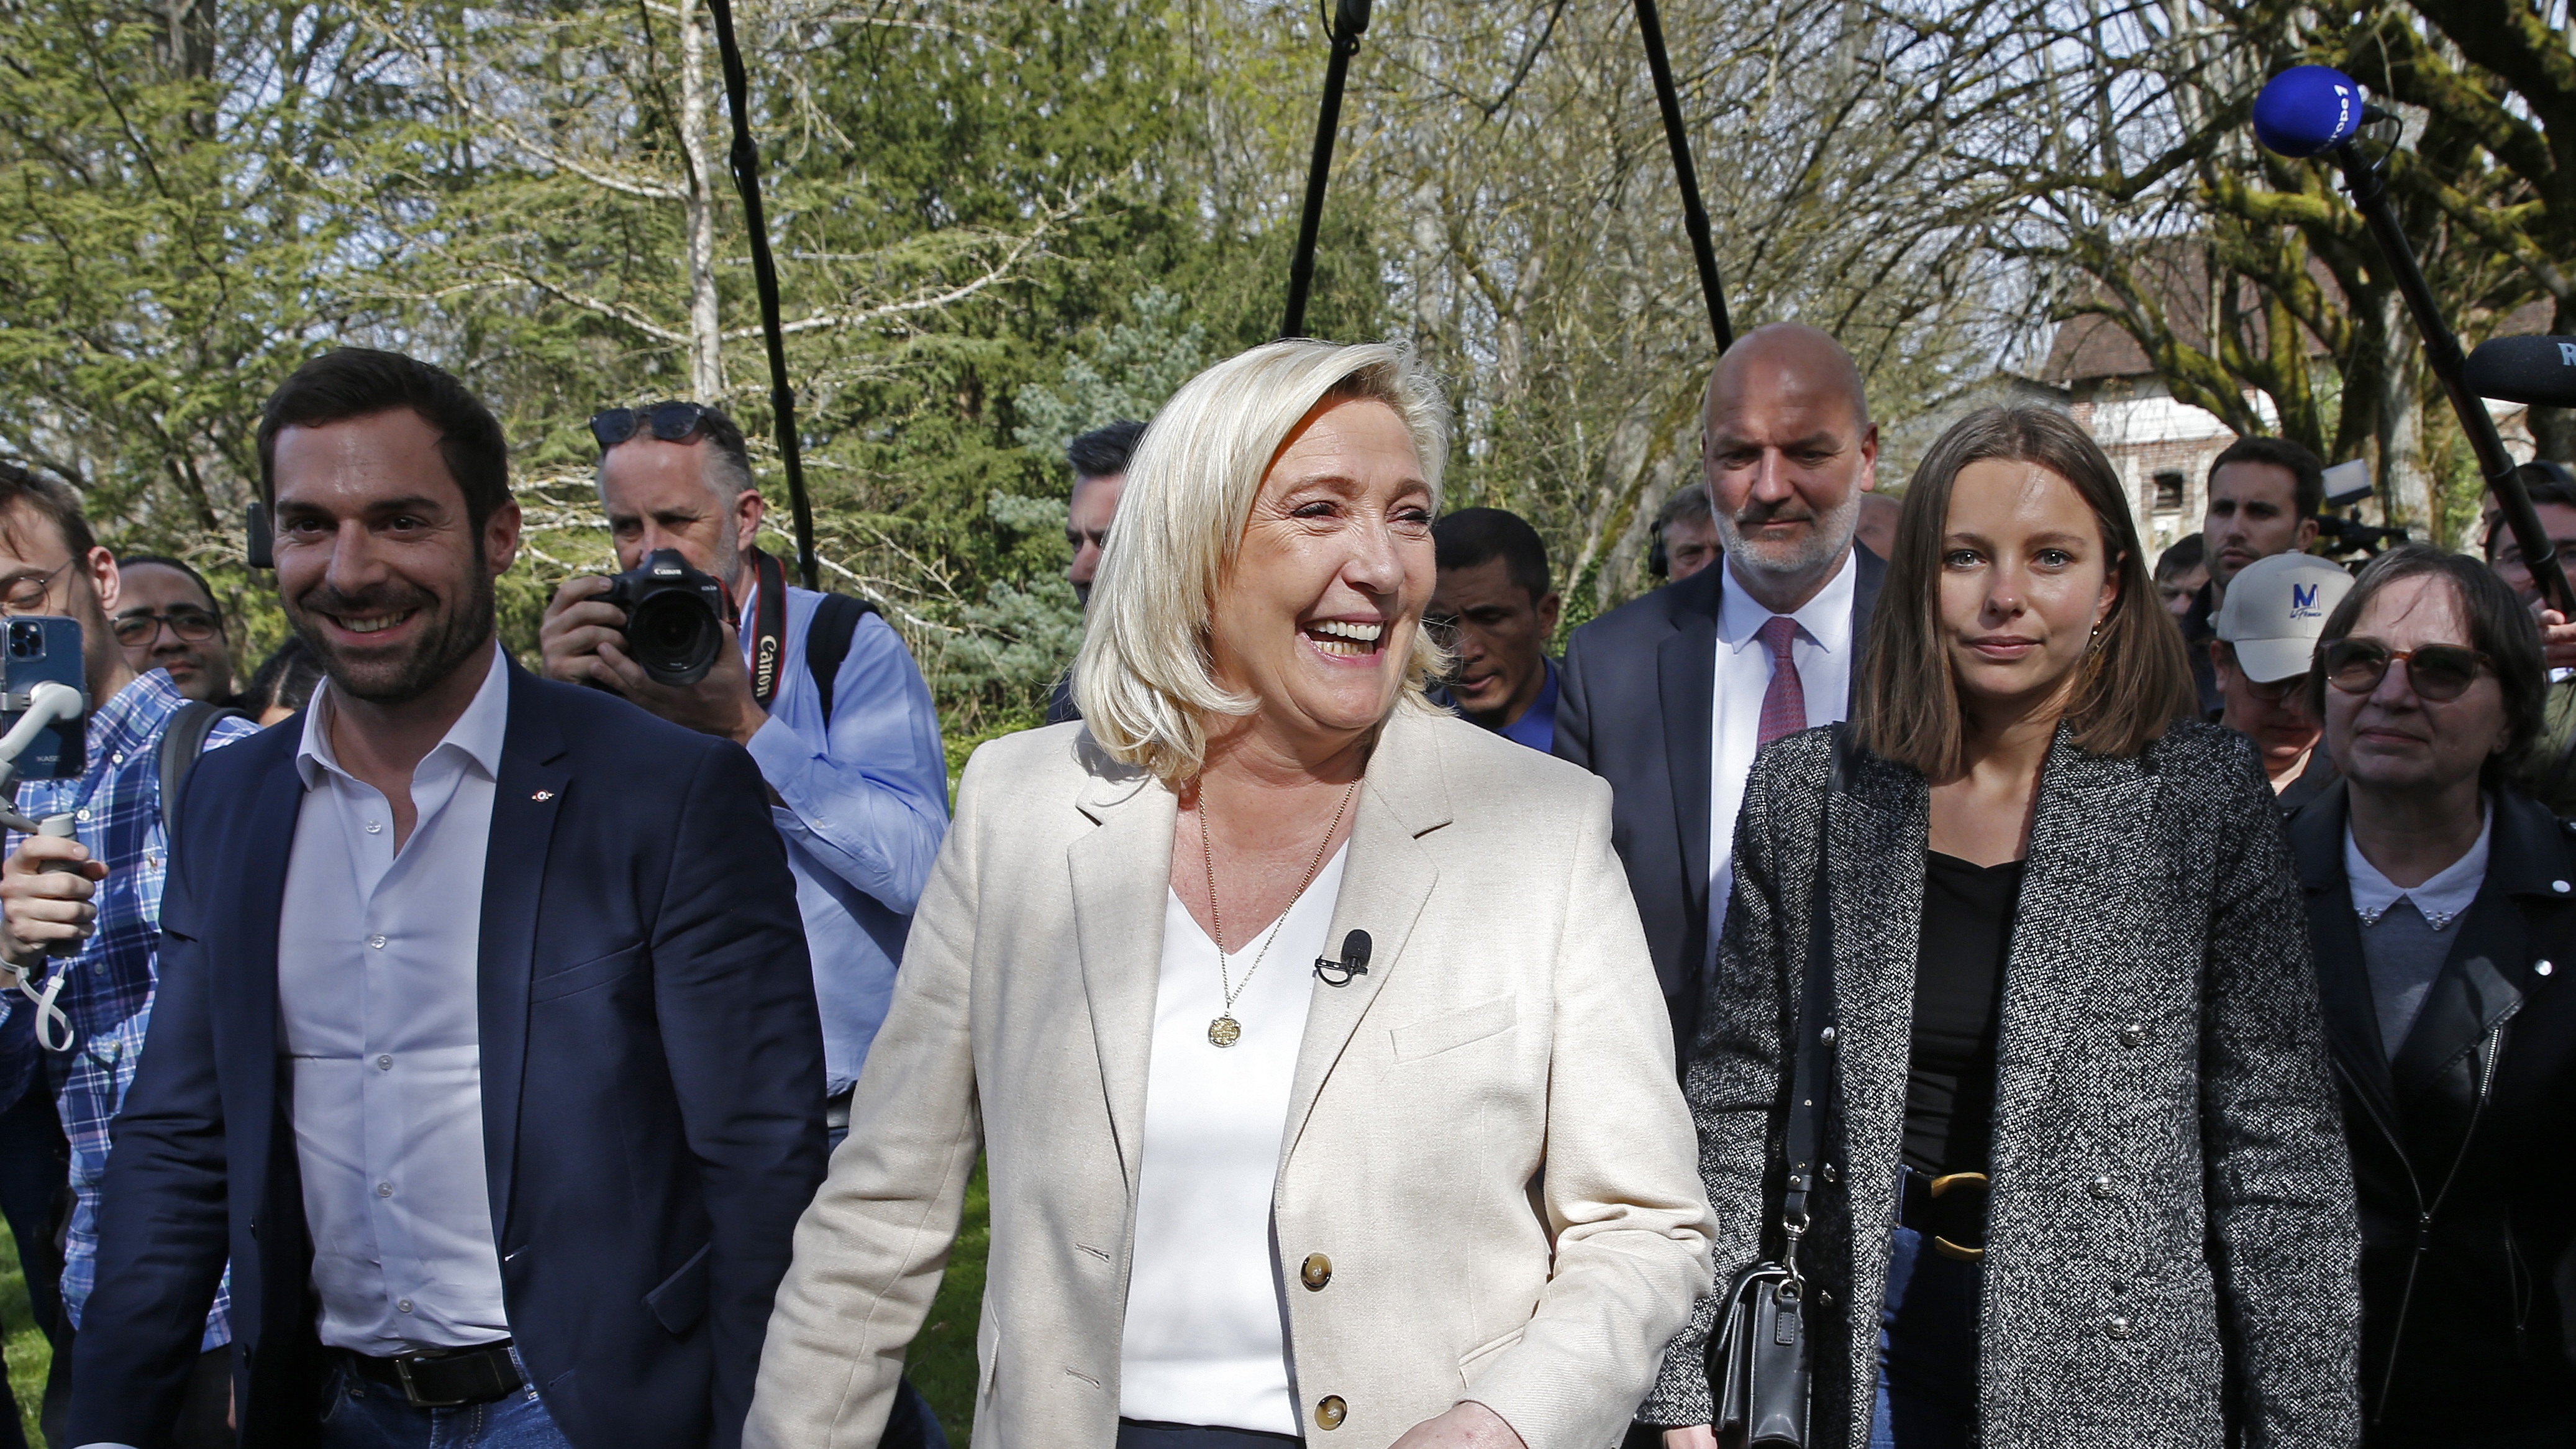 France's Le Pen proposes referendum on immigration if elected president